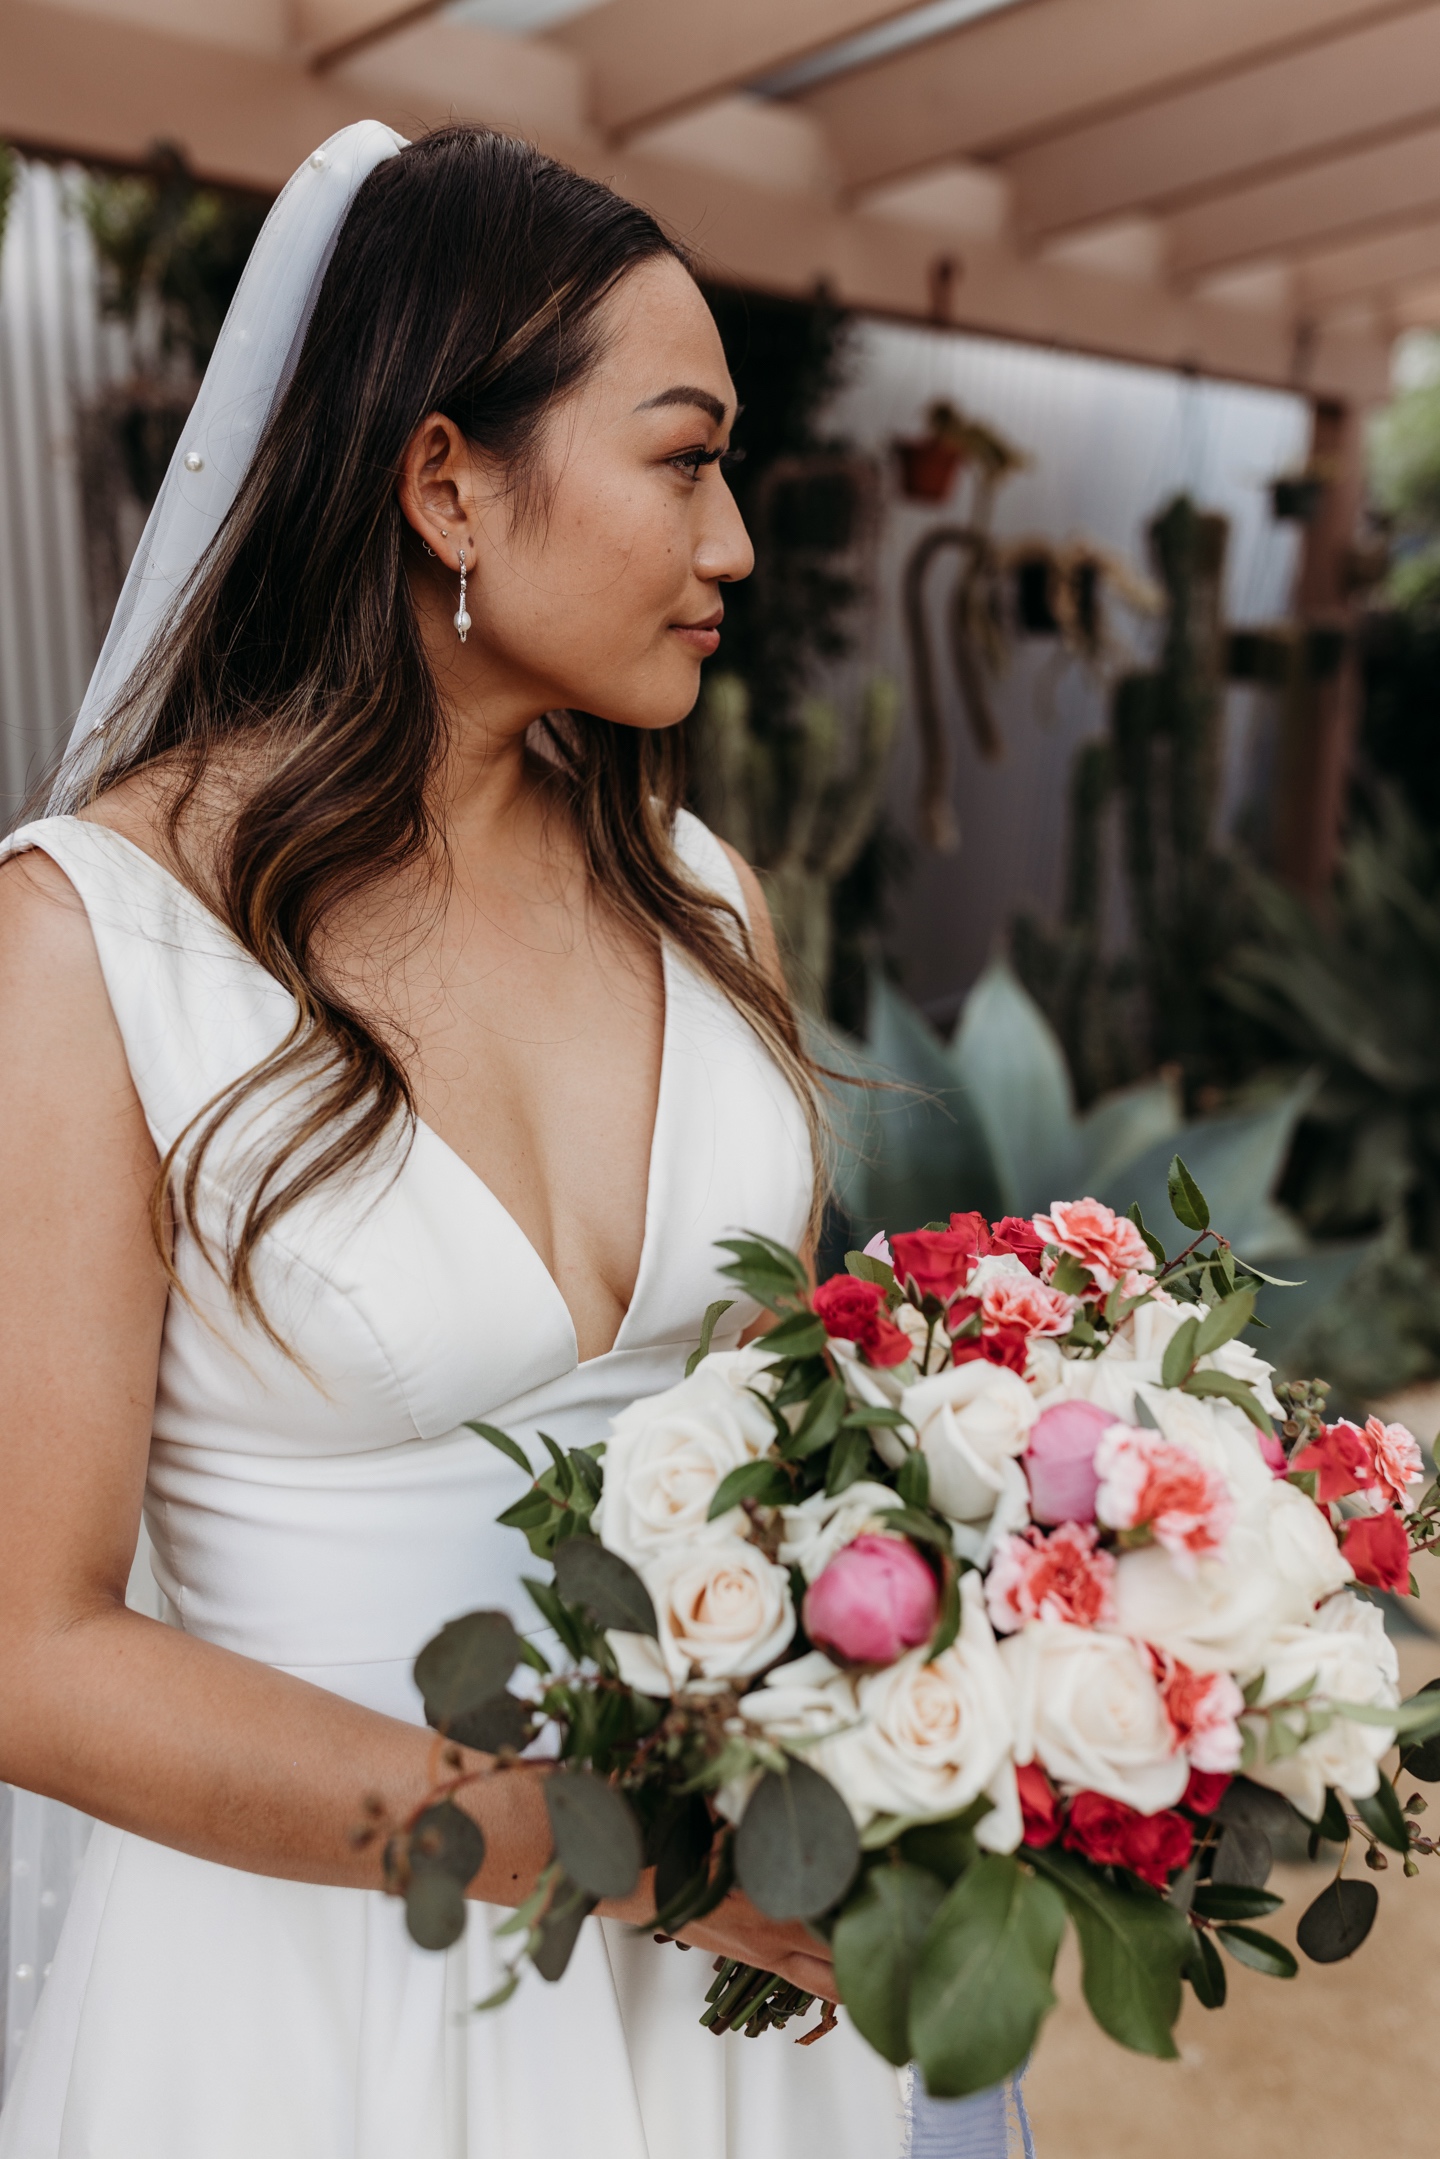 Profile of the bride in her wedding dress holding her bouquet of red, white, and pink flowers. Liz Koston Photography.